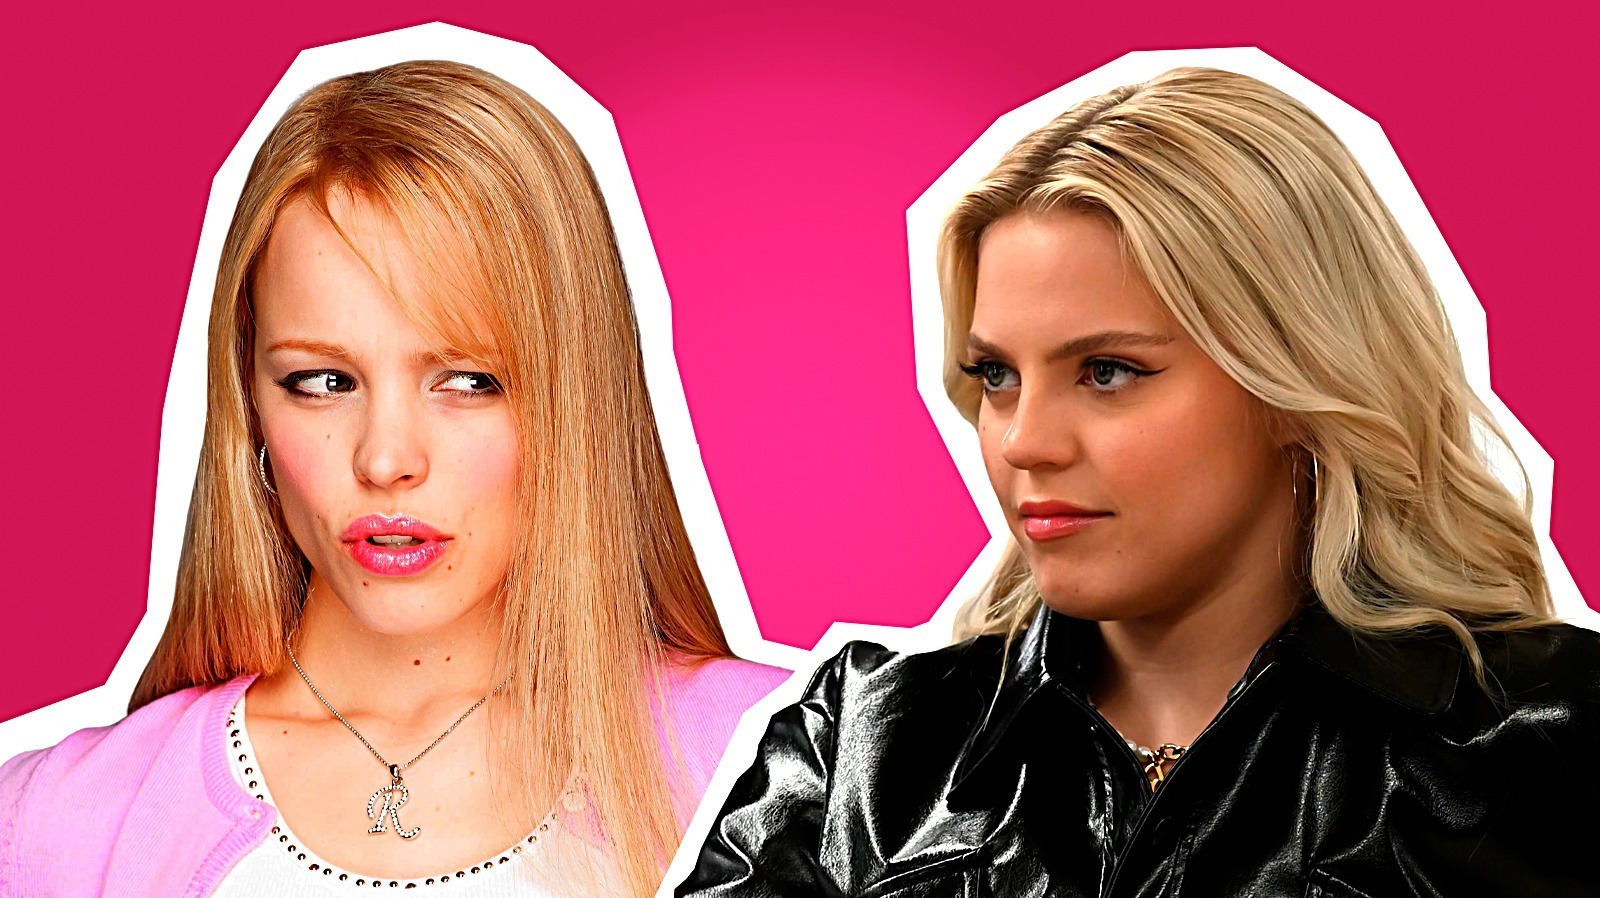 Mean Girls' Regina George-Inspired Initial Necklaces